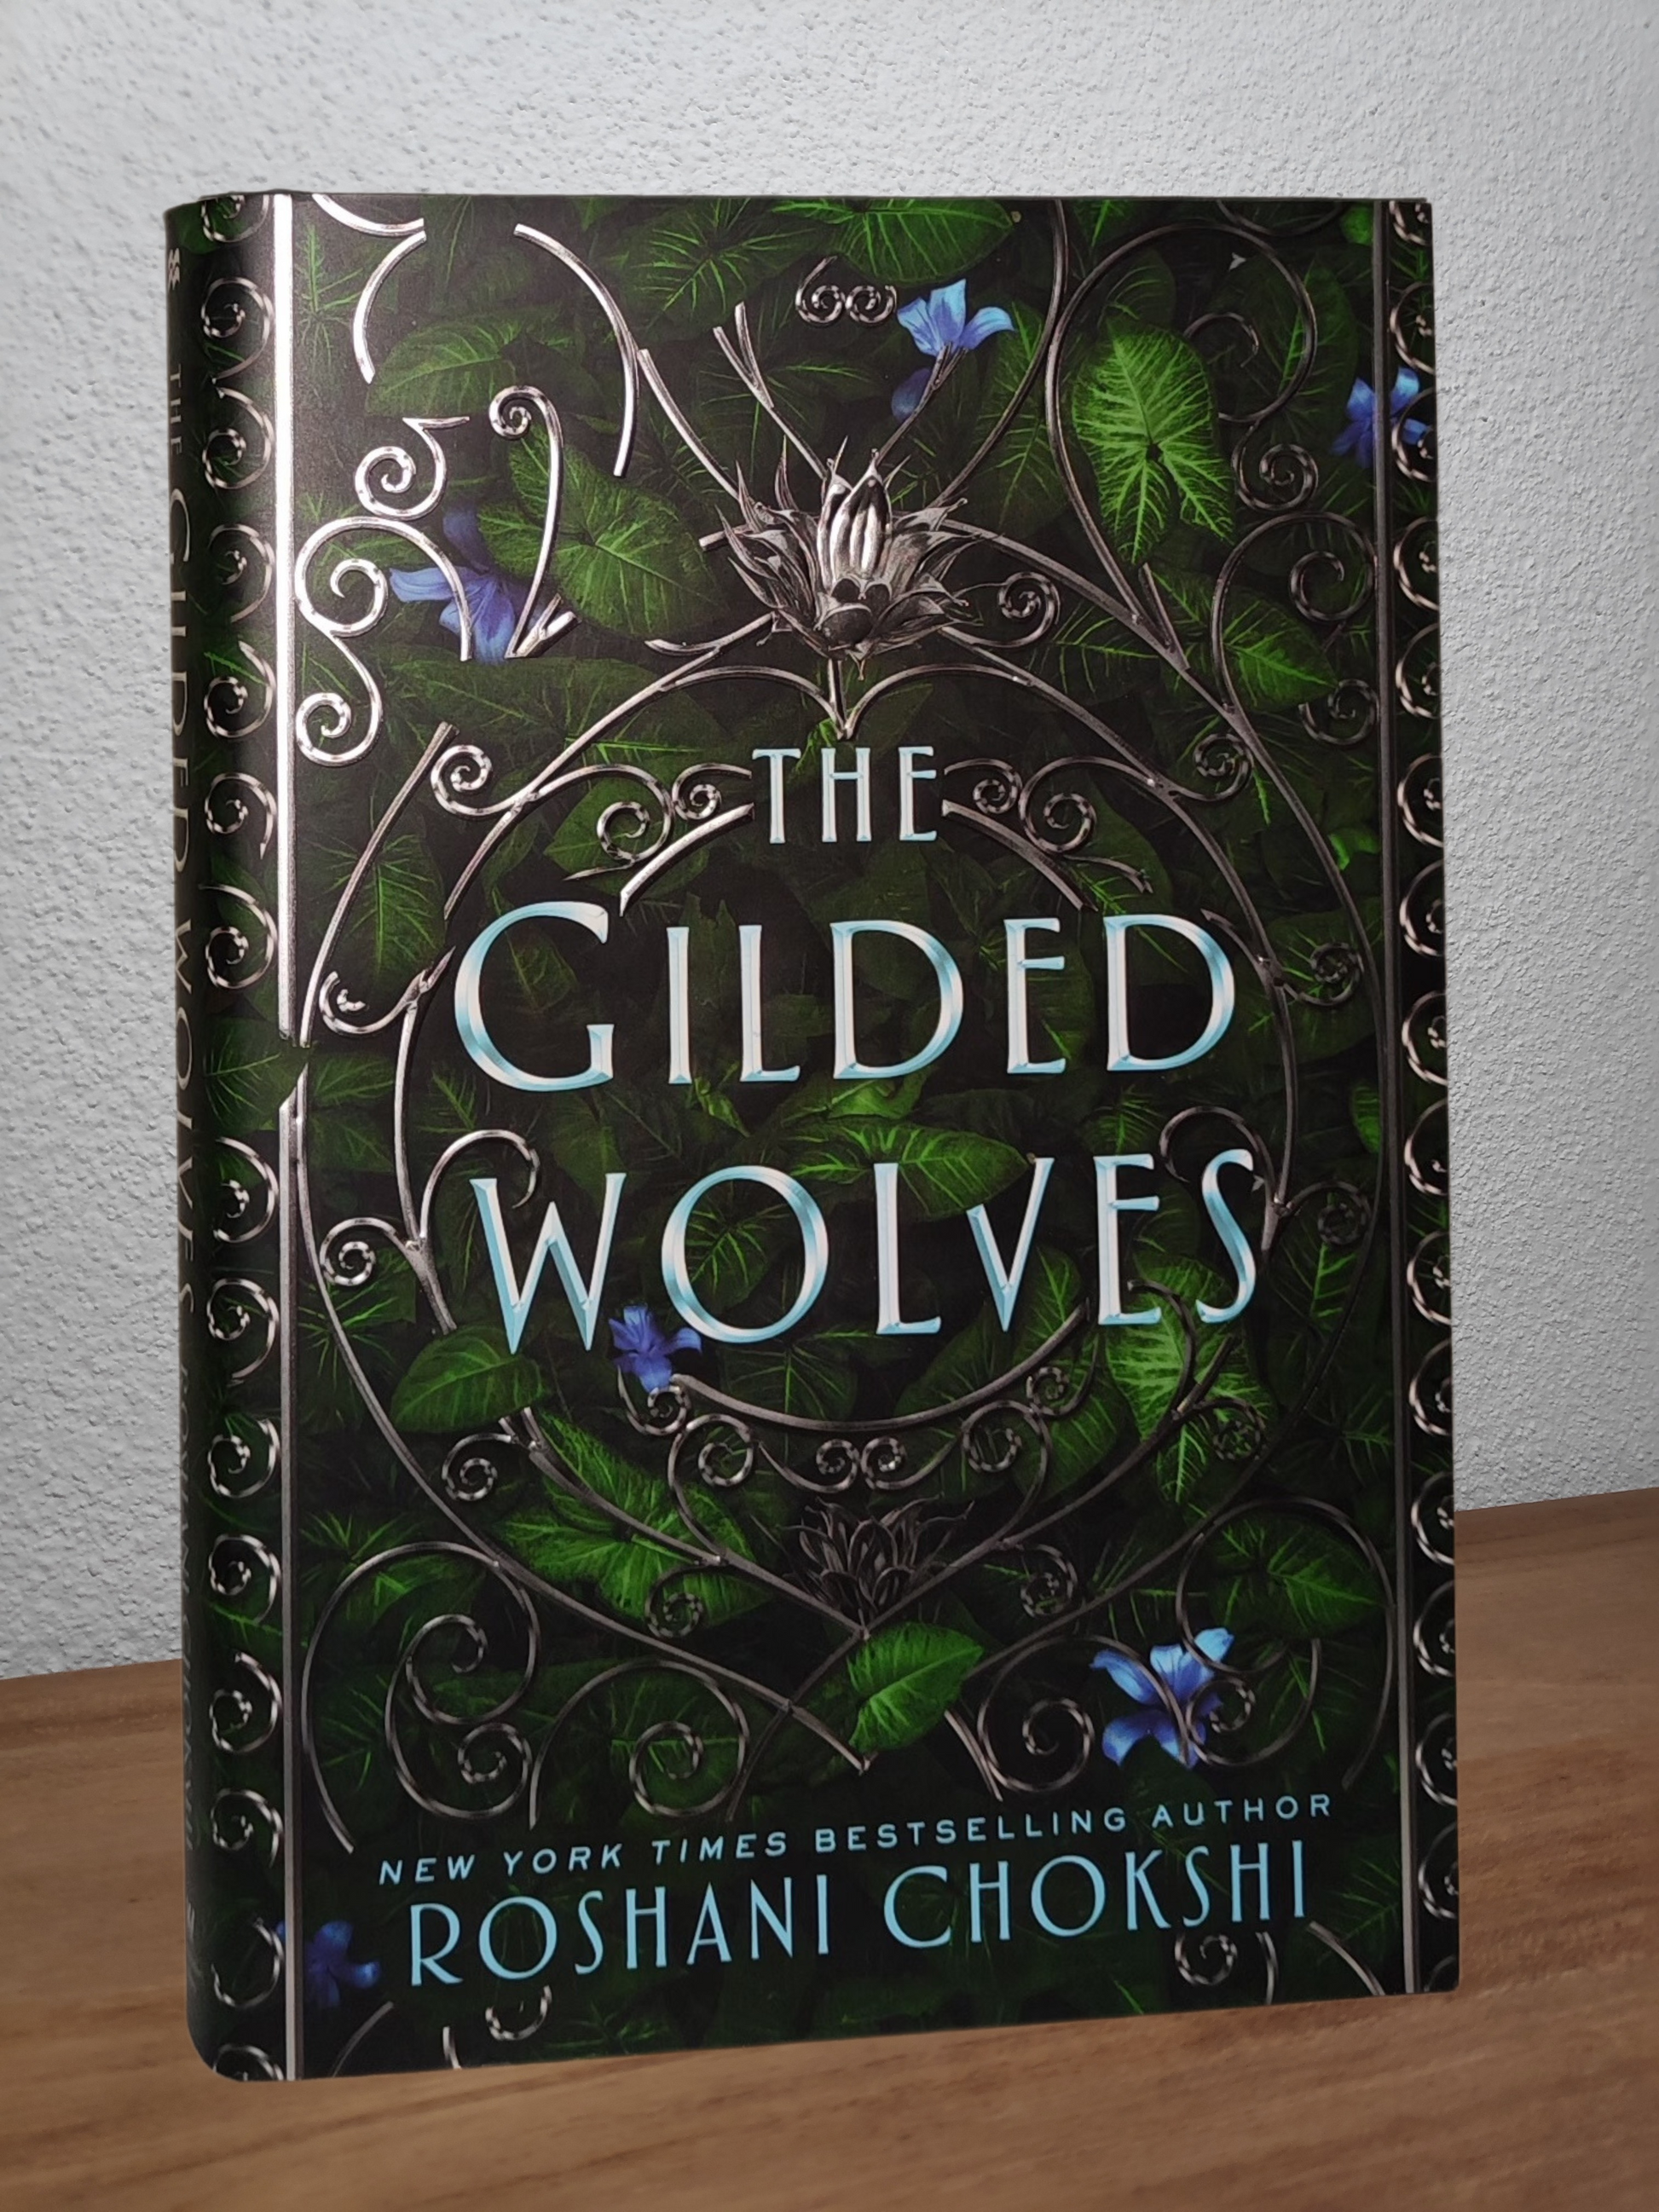 Roshani Chokshi - The Gilded Wolves (#1) - Second-hand english book to deliver in Zurich & Switzerland